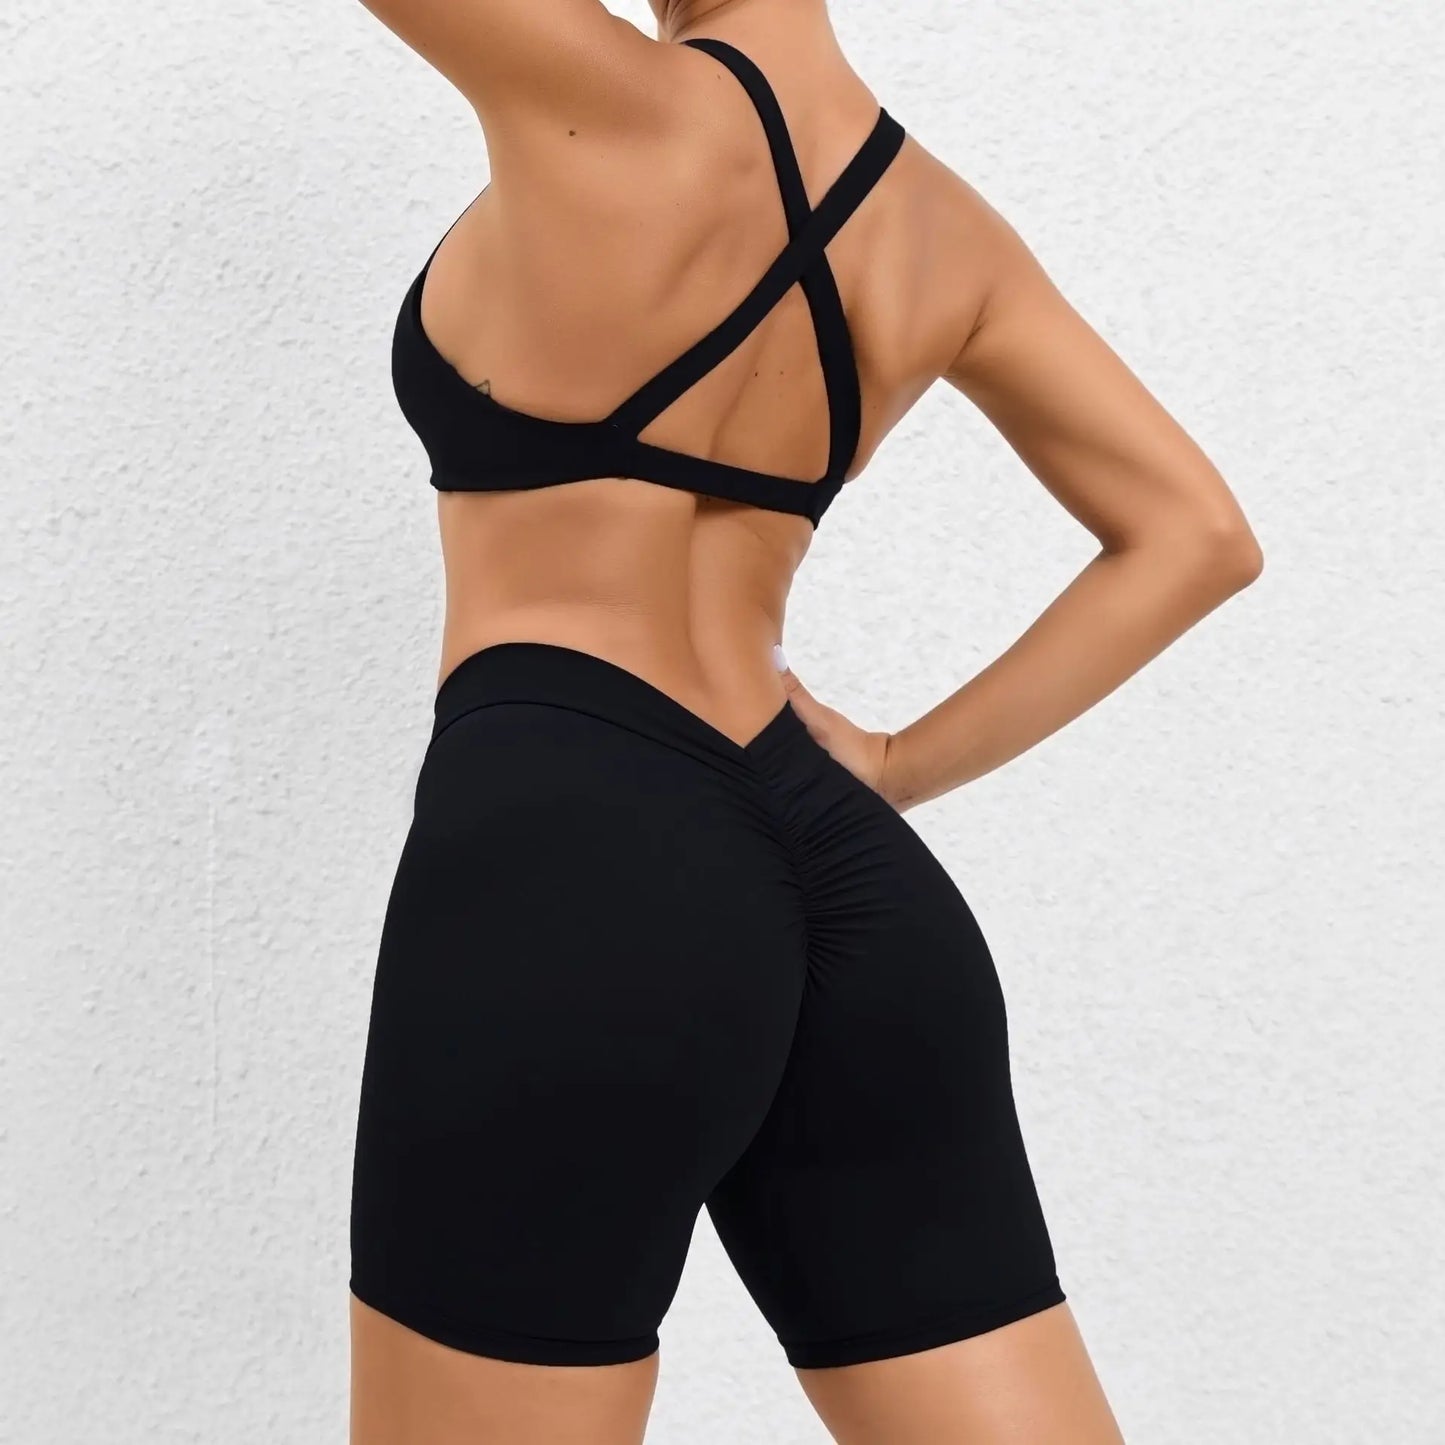 Irene Fitness Top and Short Set